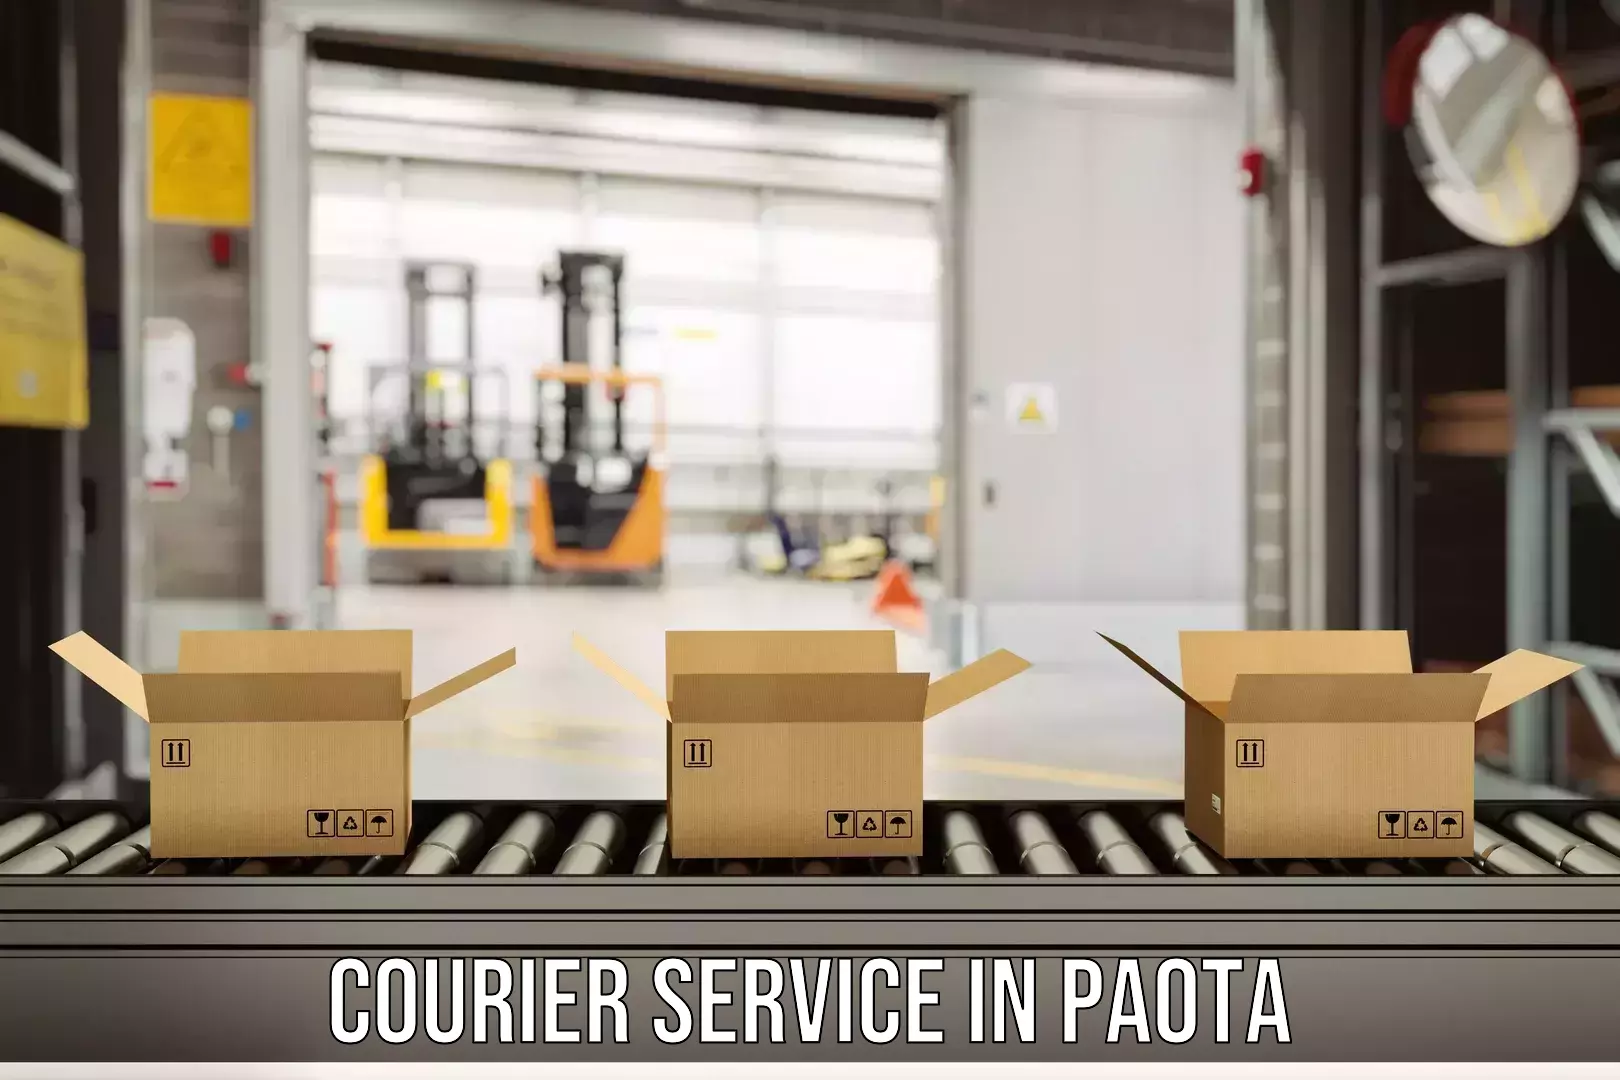 Advanced shipping technology in Paota